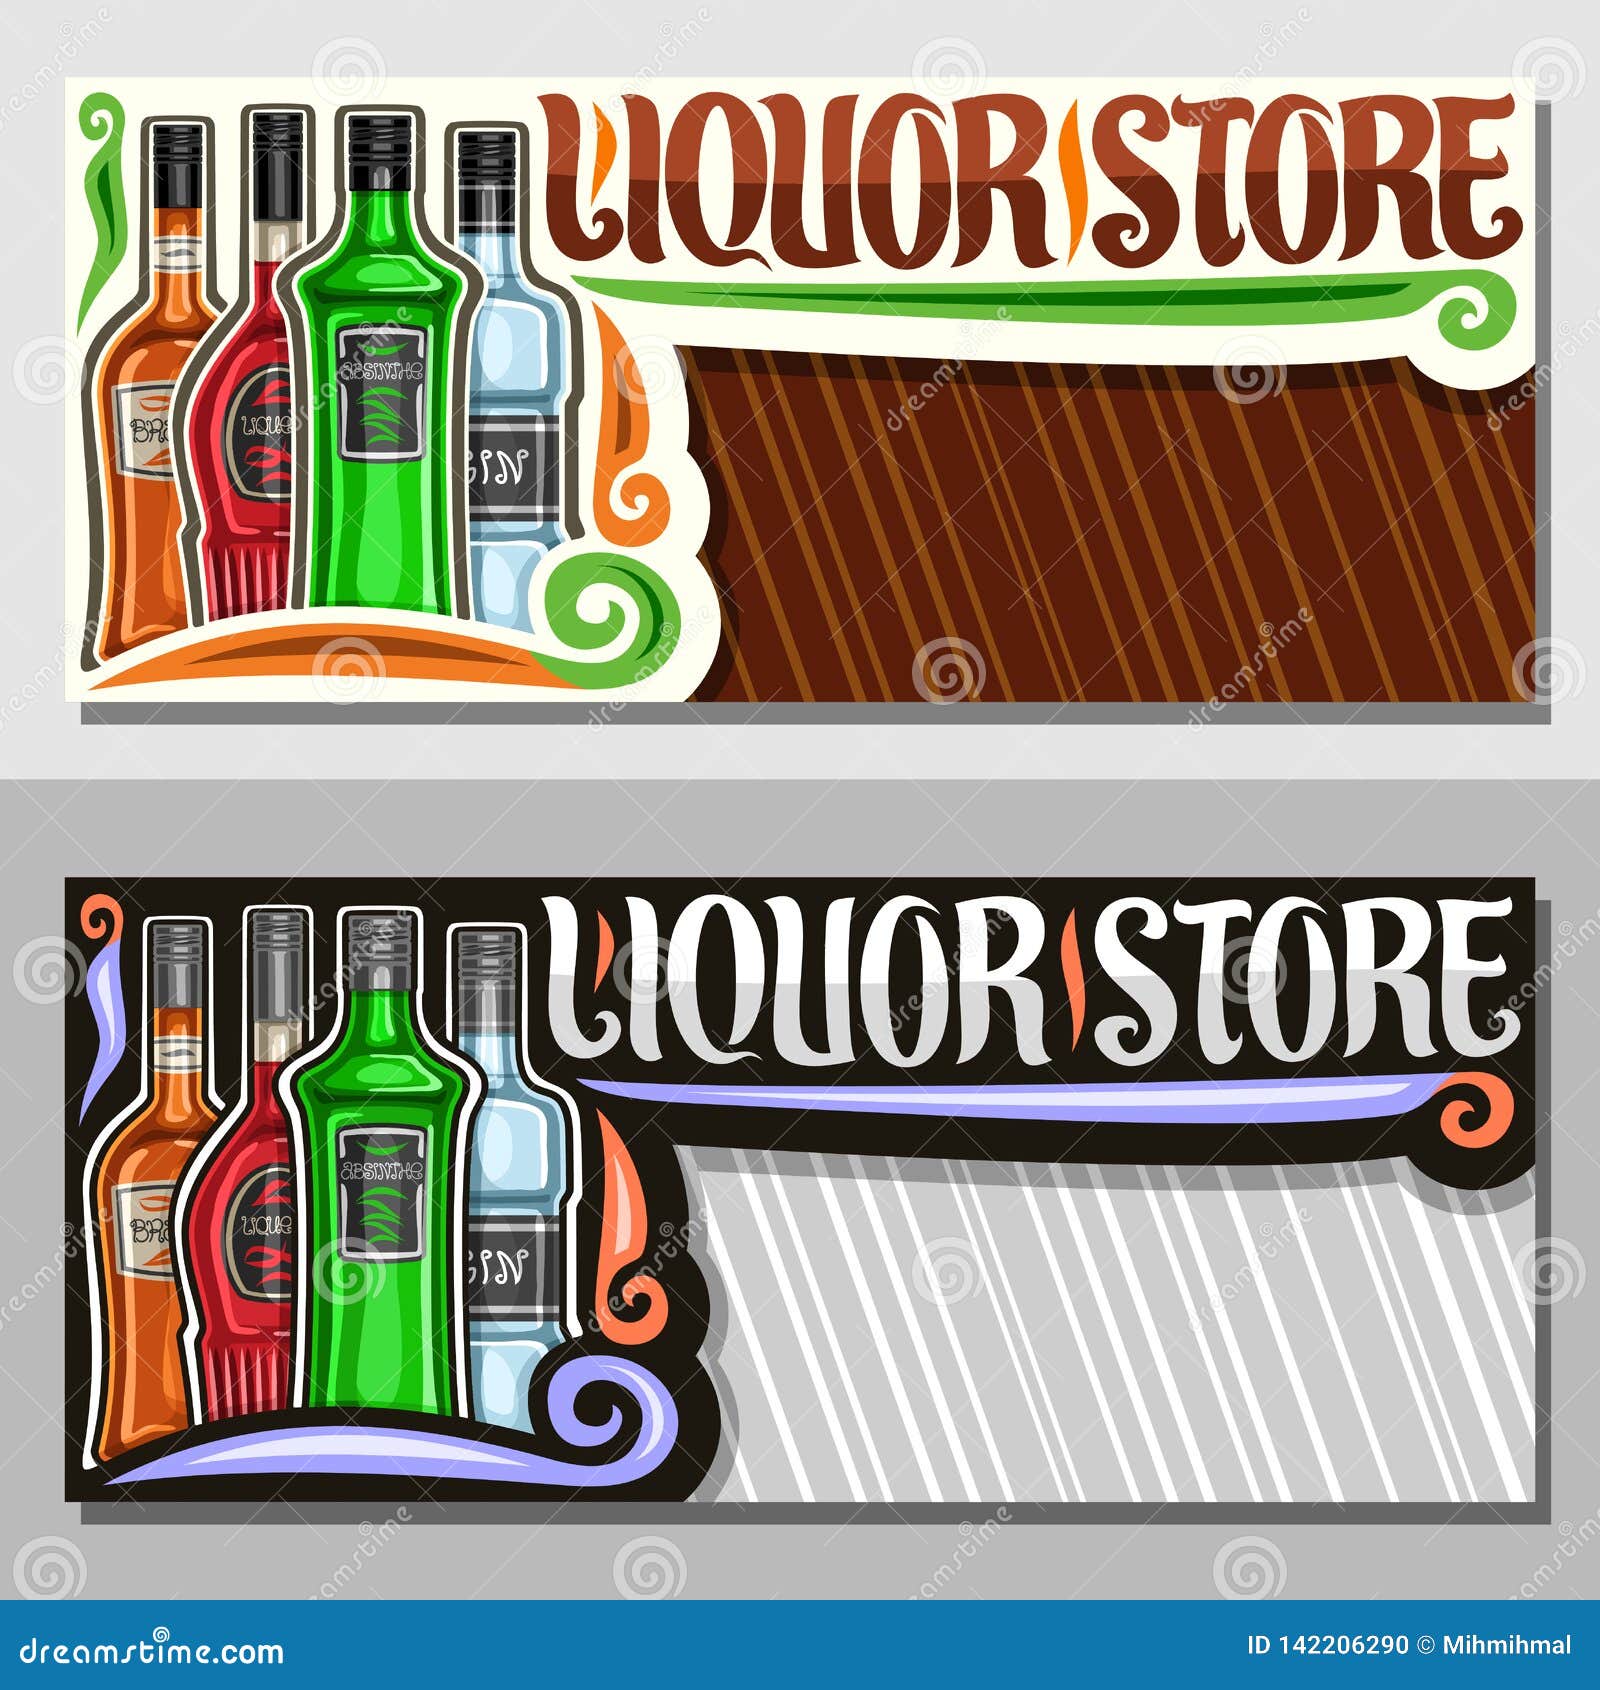  banners for liquor store